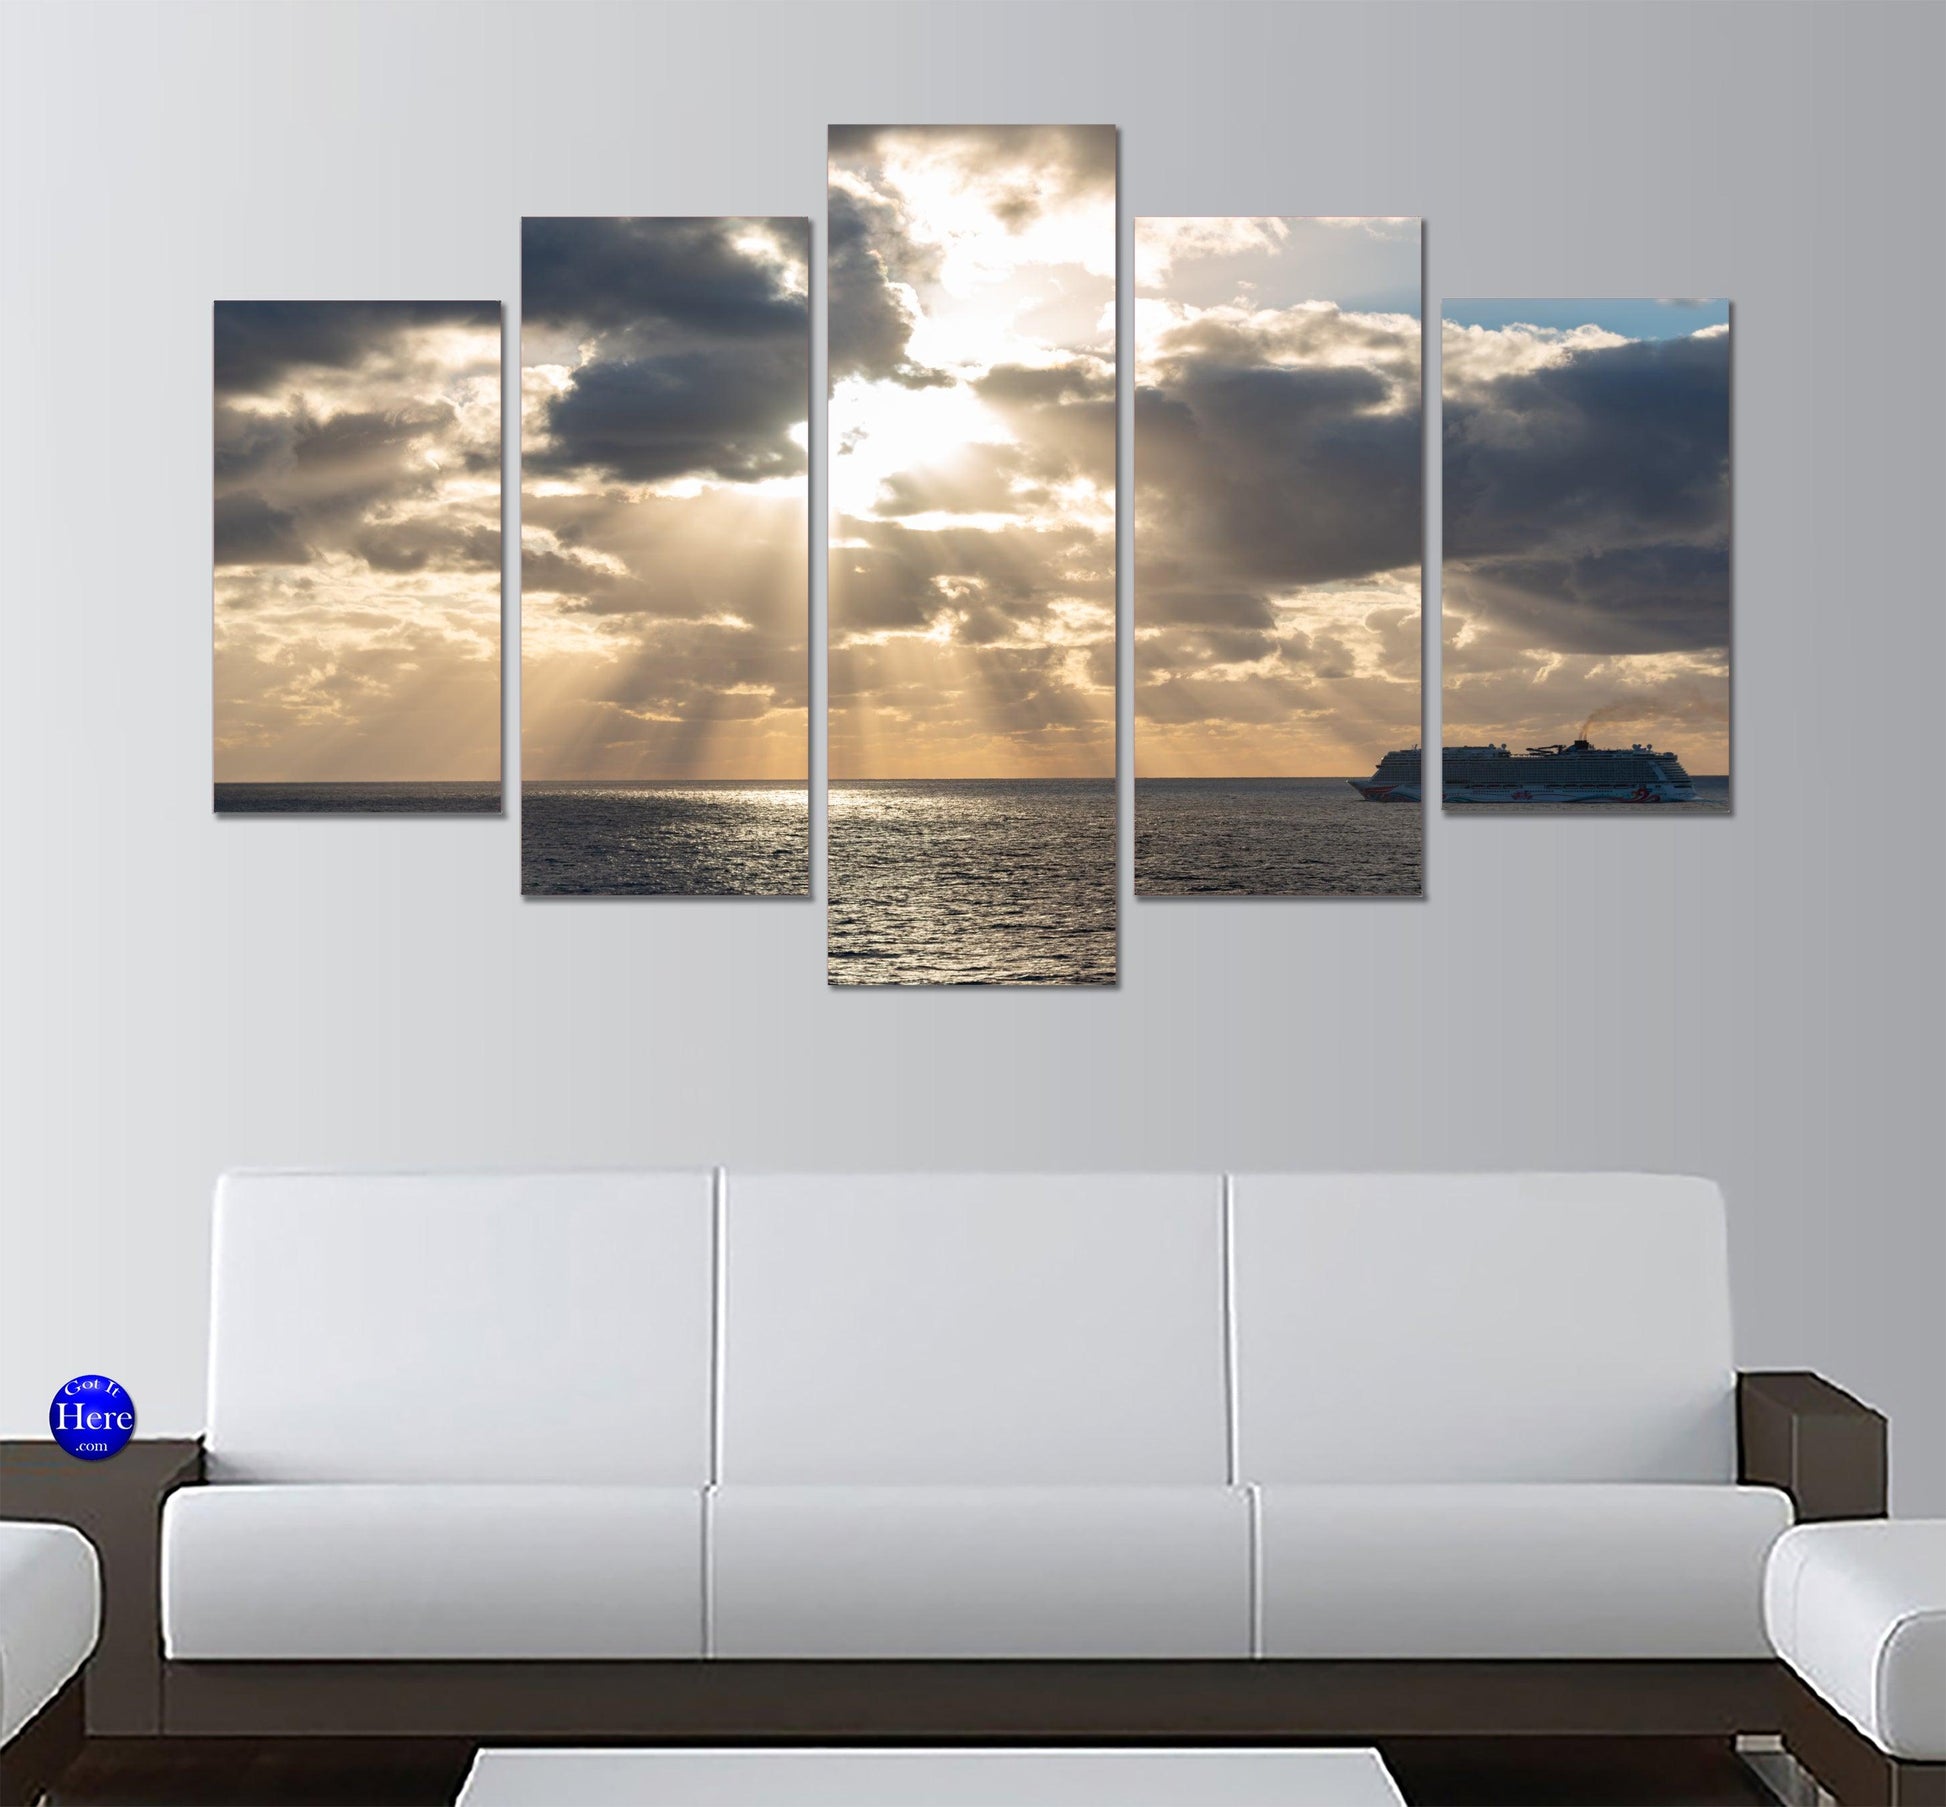 Cruise Ship Sails Into The Sunset 5 Panel Canvas Print Wall Art - GotItHere.com